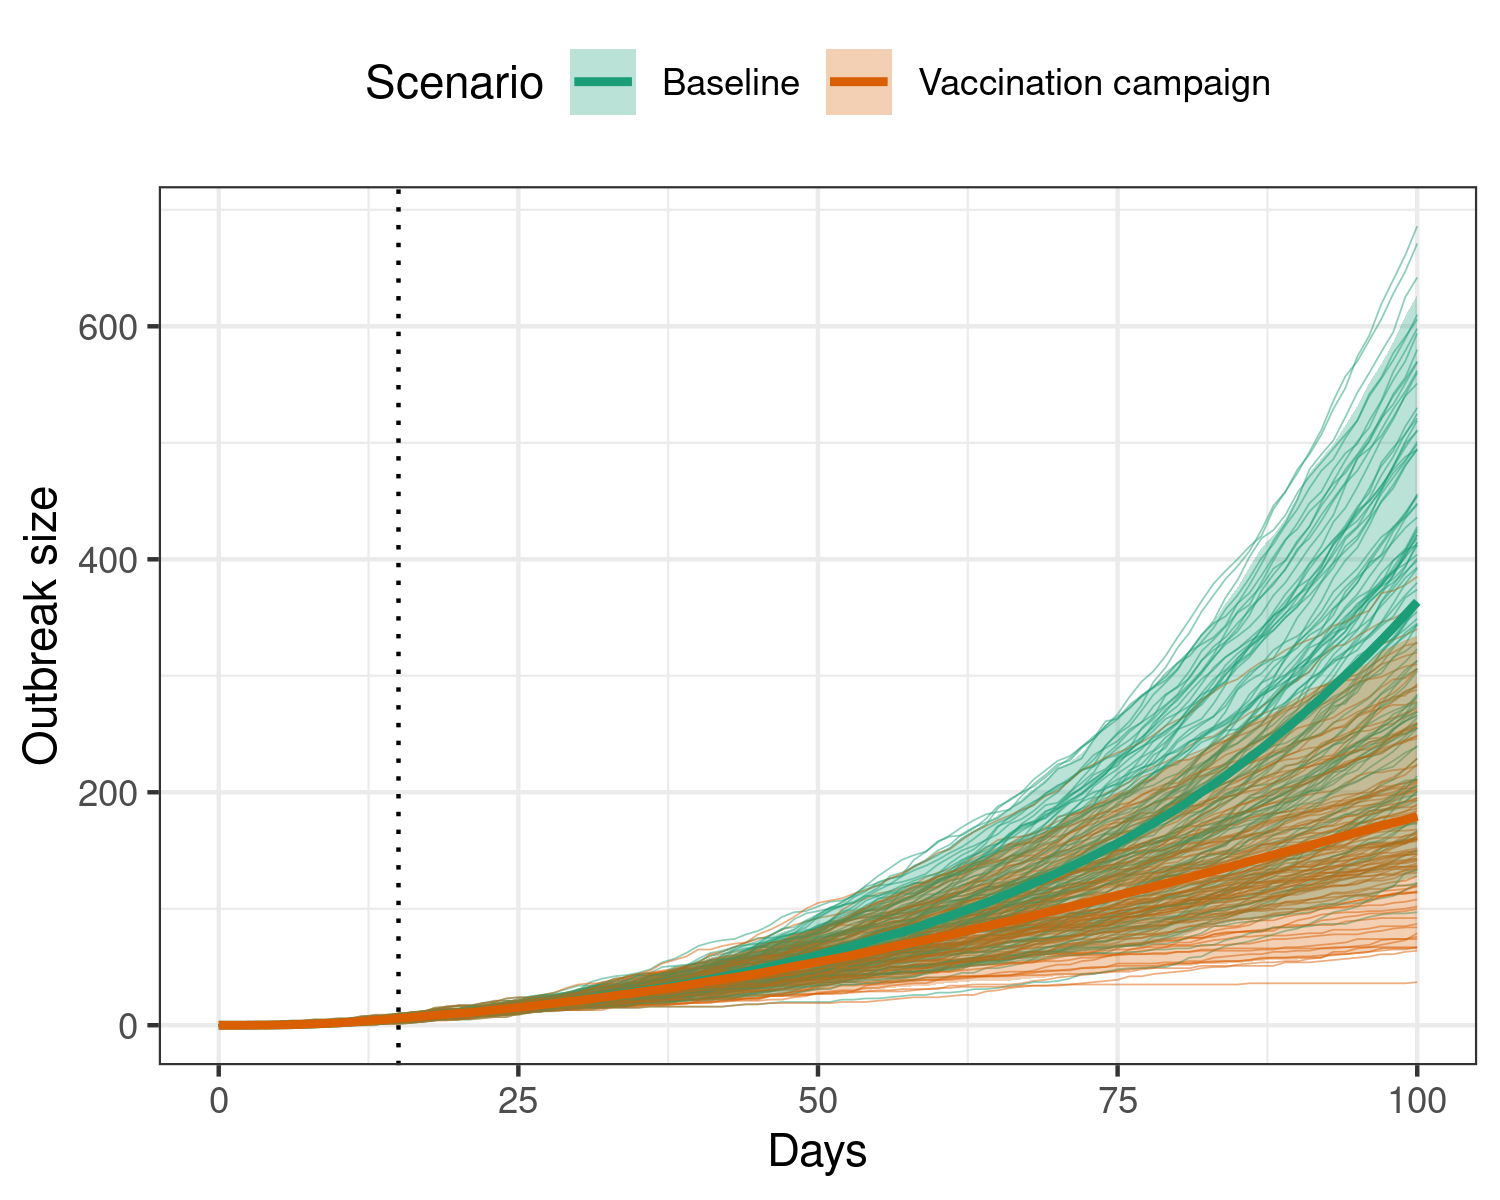 Effect of implementing a vaccination regime that gradually reduces ebola transmission over time, using the time dependence functionality.